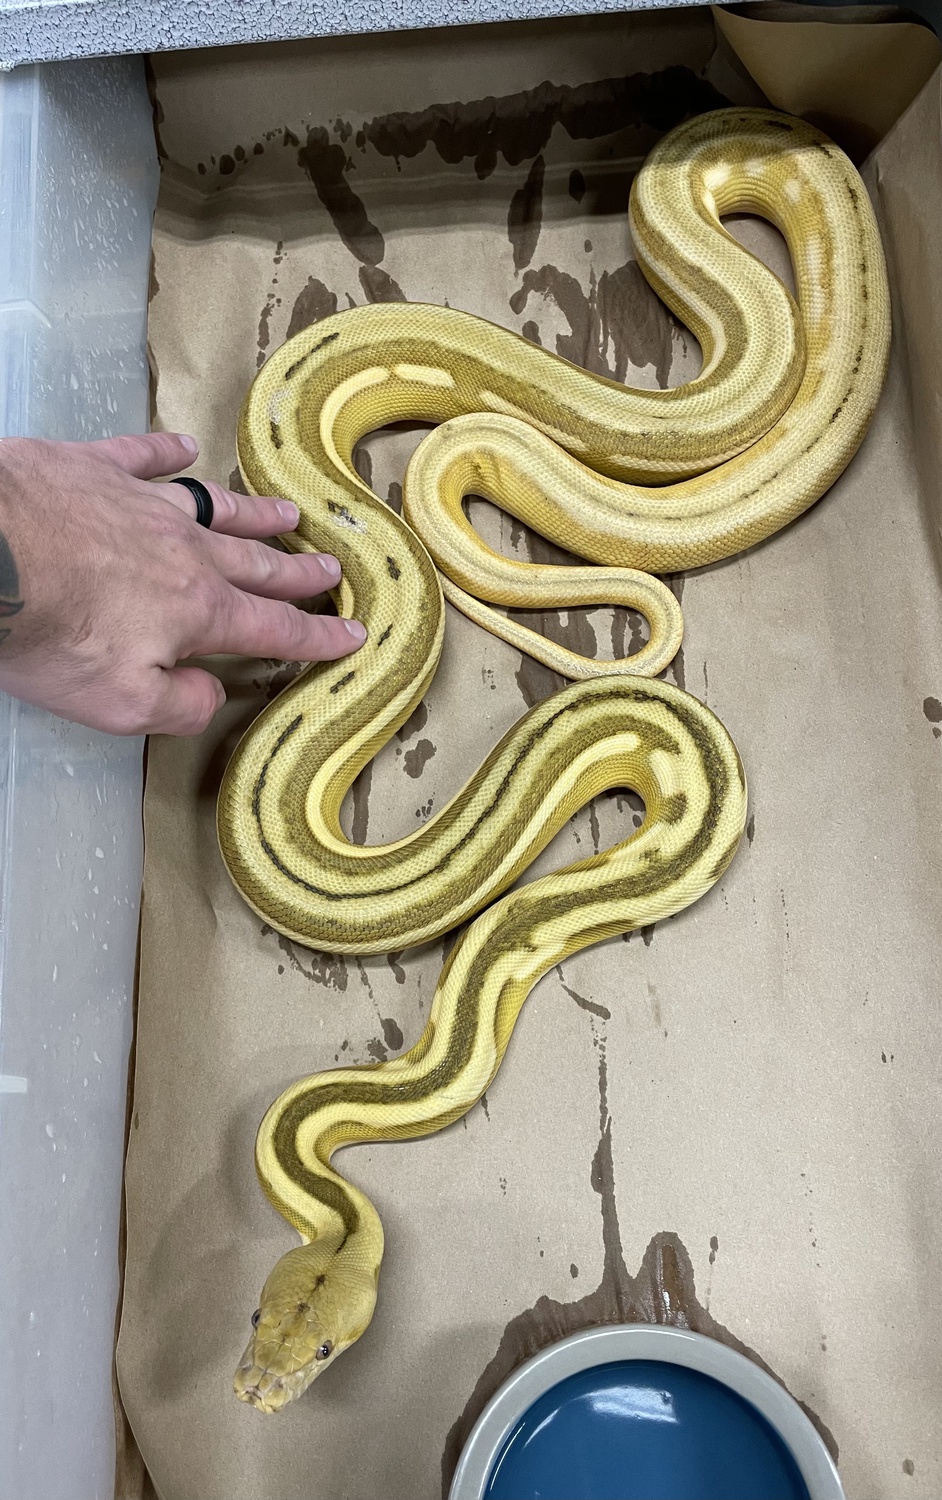 Ogs Suntiger Reticulated Python by New Shed Serpents